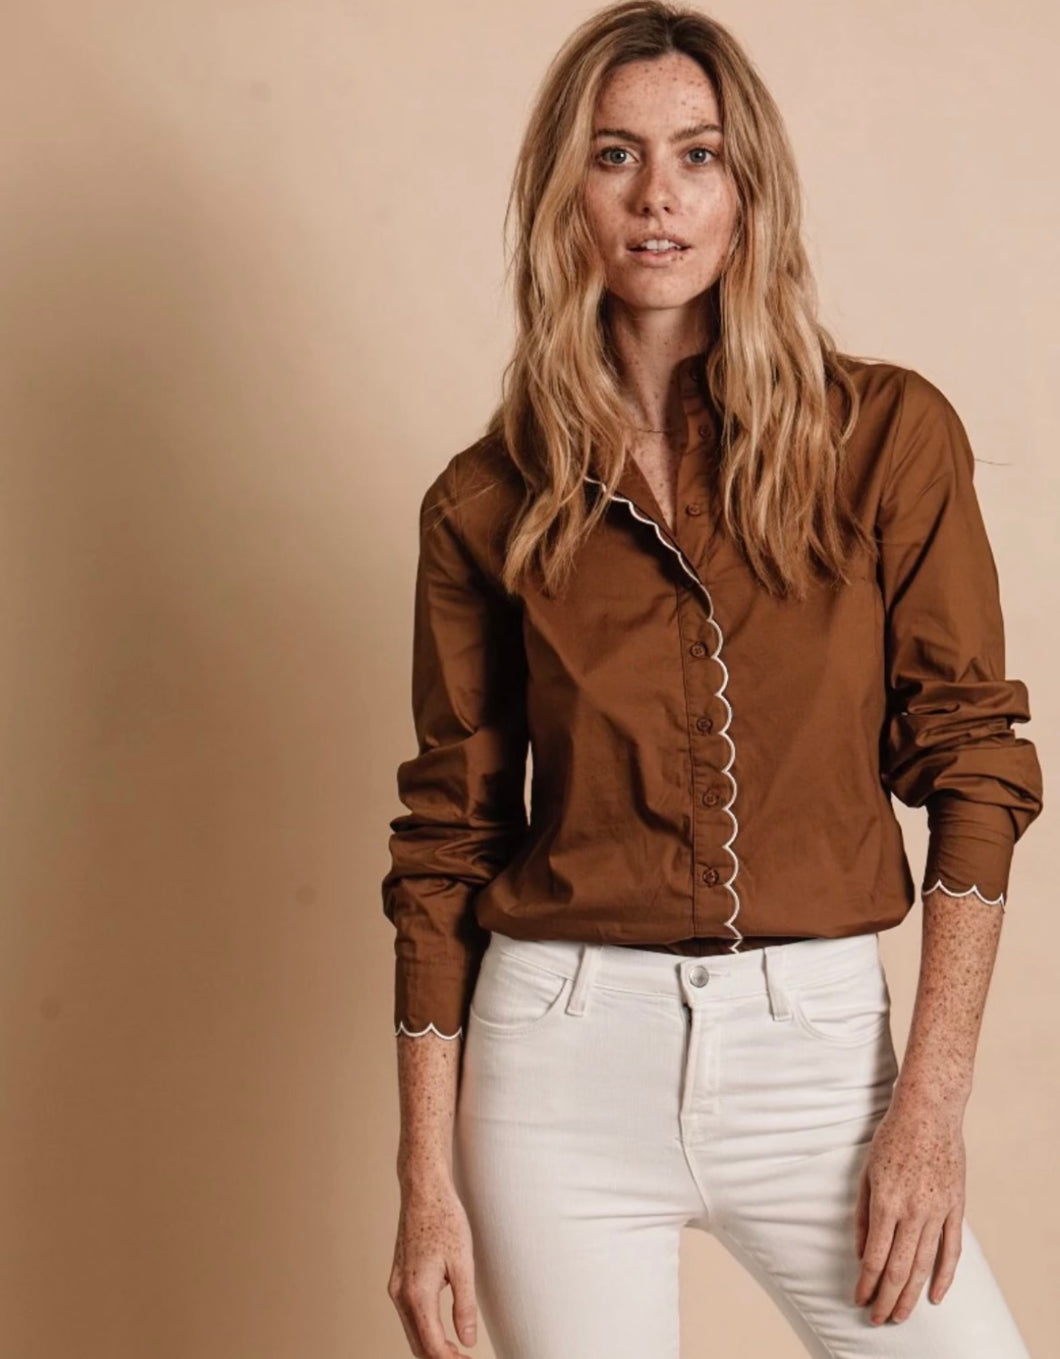 The Scalloped Embroidery Shirt in Tan